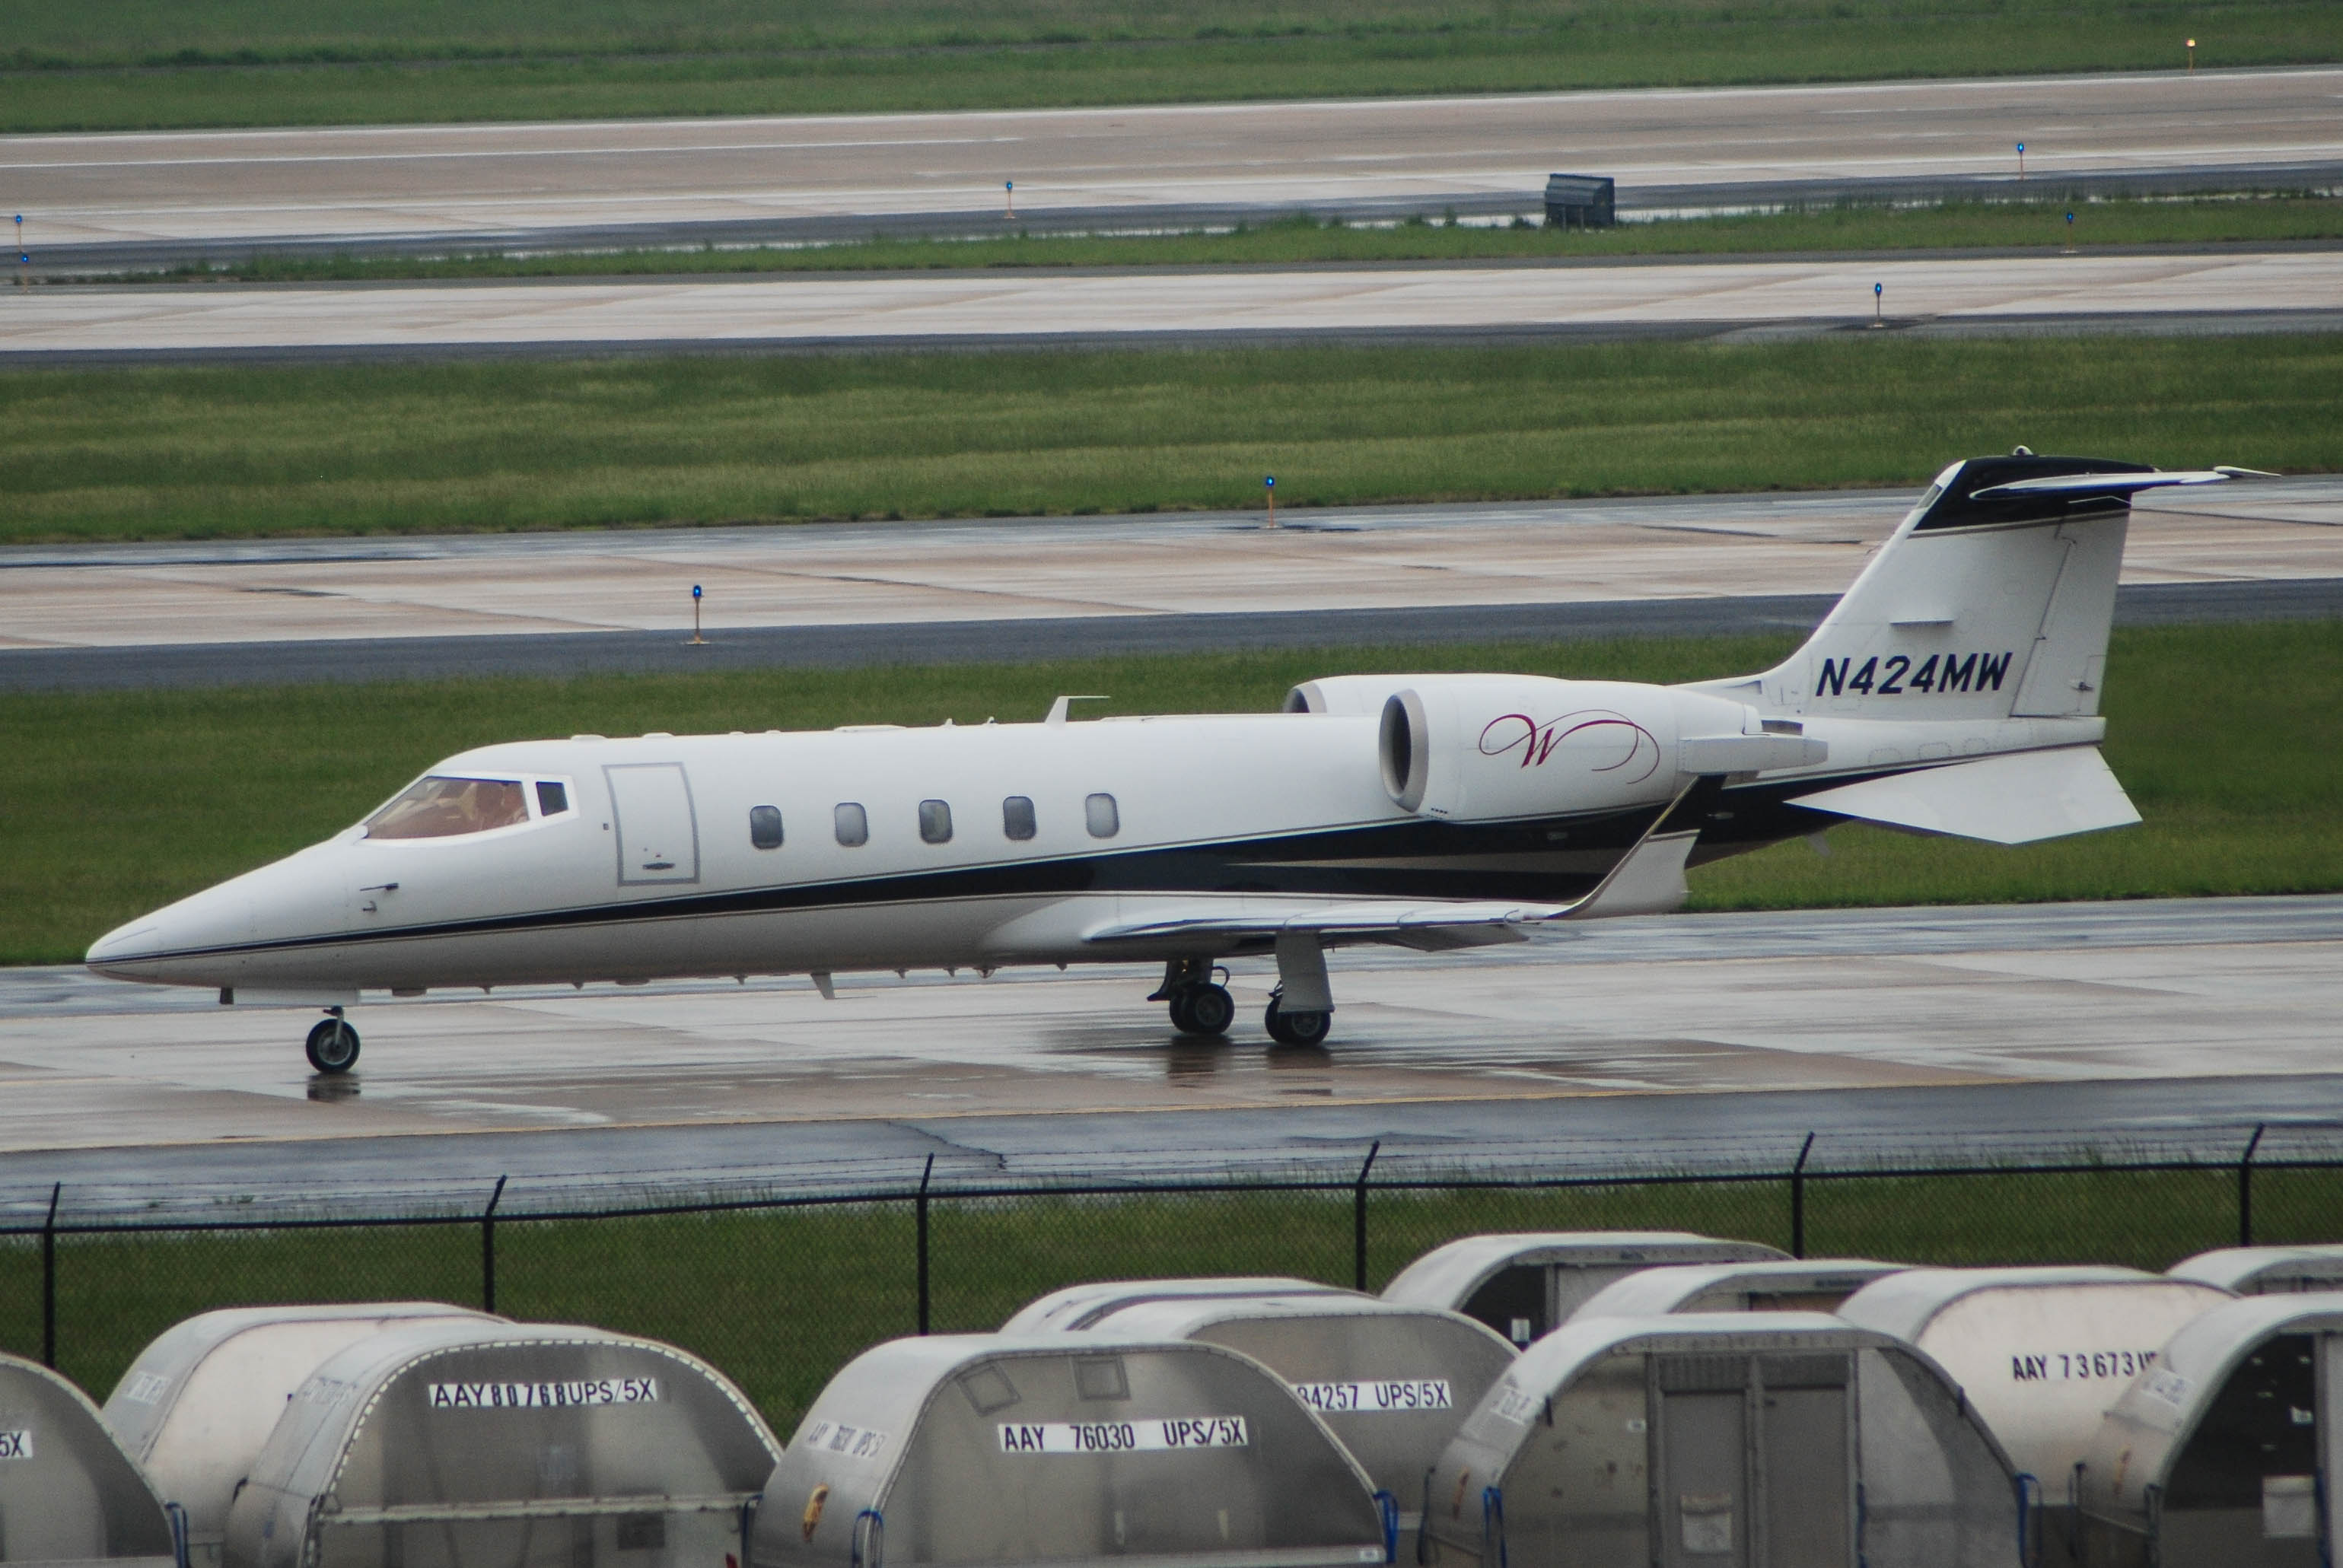 N424MW/N424MW Corporate Bombardier Learjet 60 Photo by colinw - AVSpotters.com